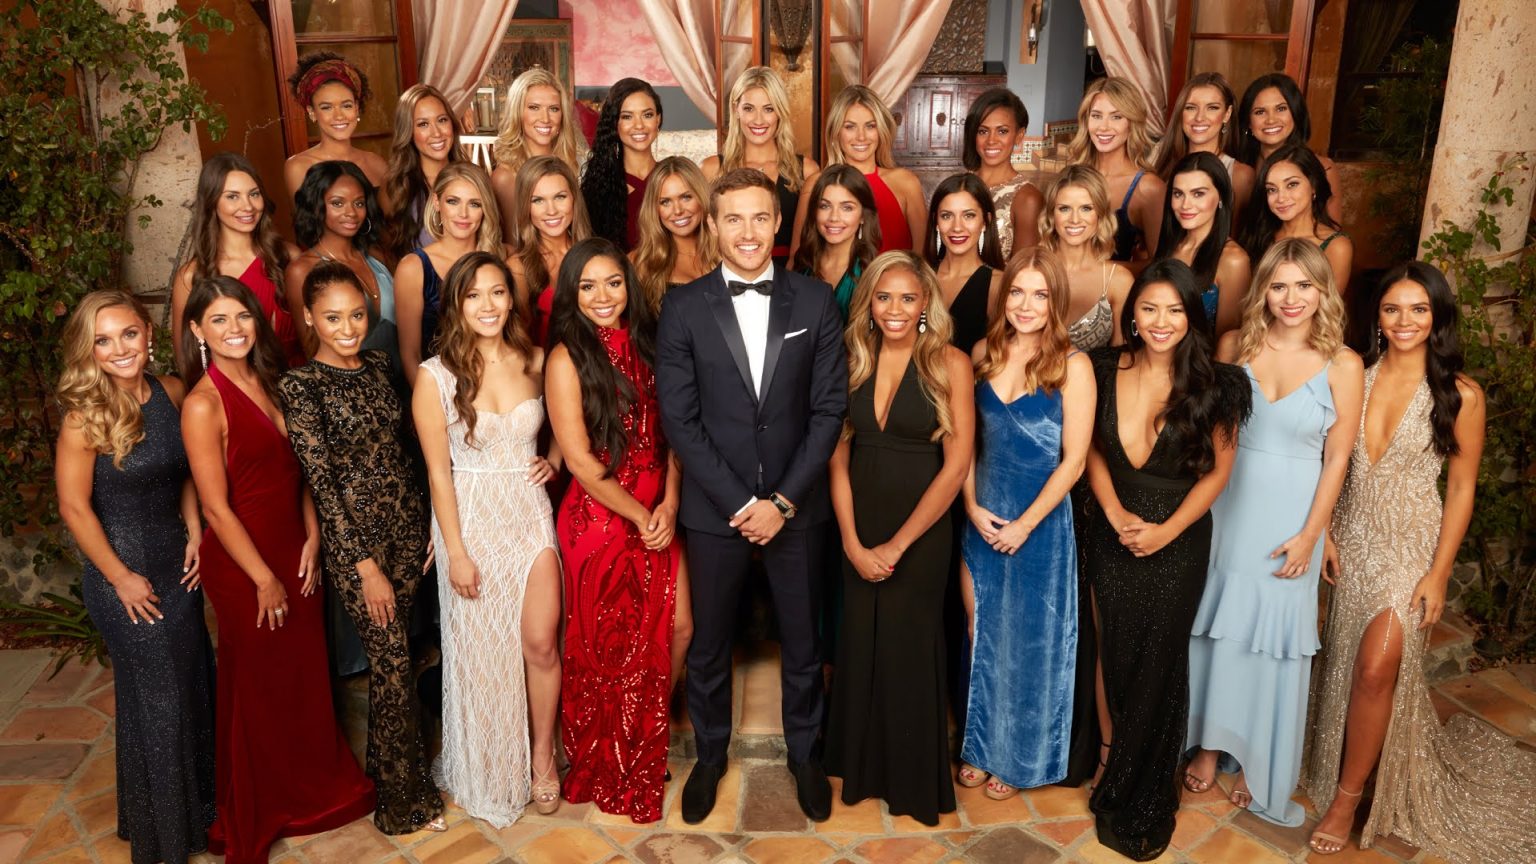 Is there Anything Wrong with The Bachelorette Participants' Wish to